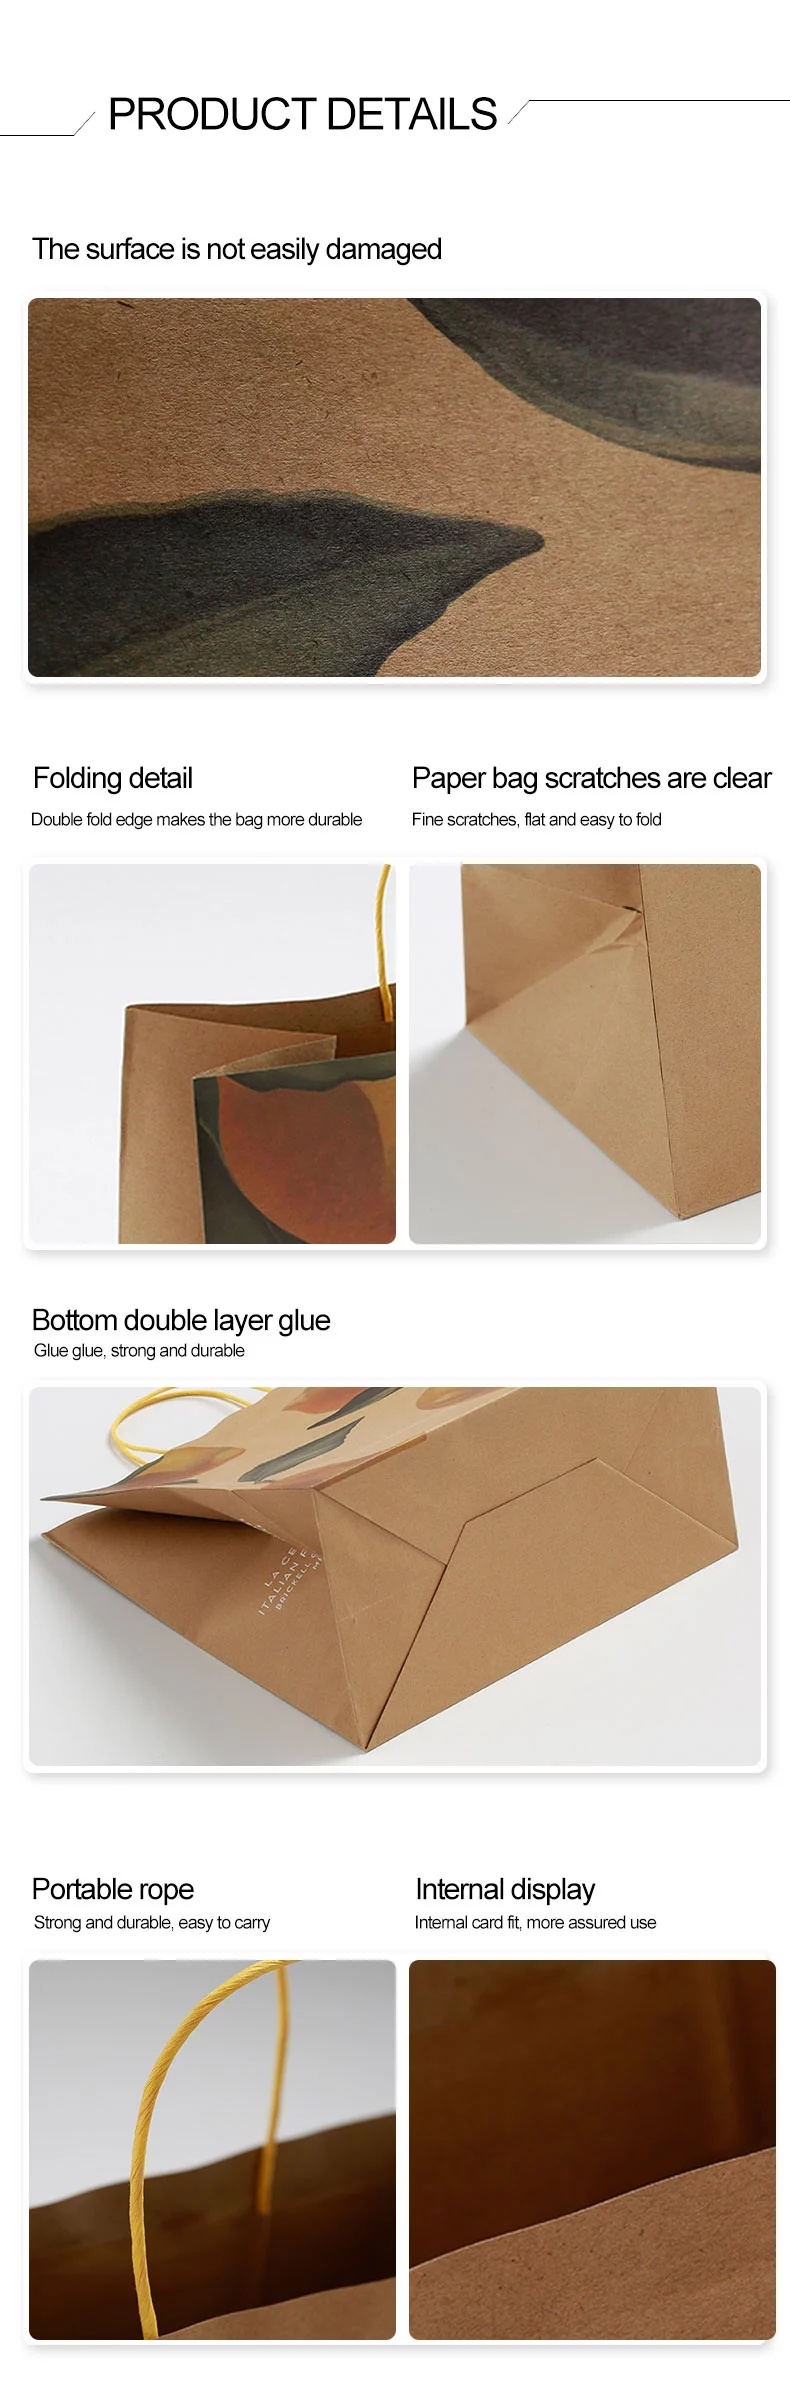 High Quality Brown Kraft Paper Bag with Handles